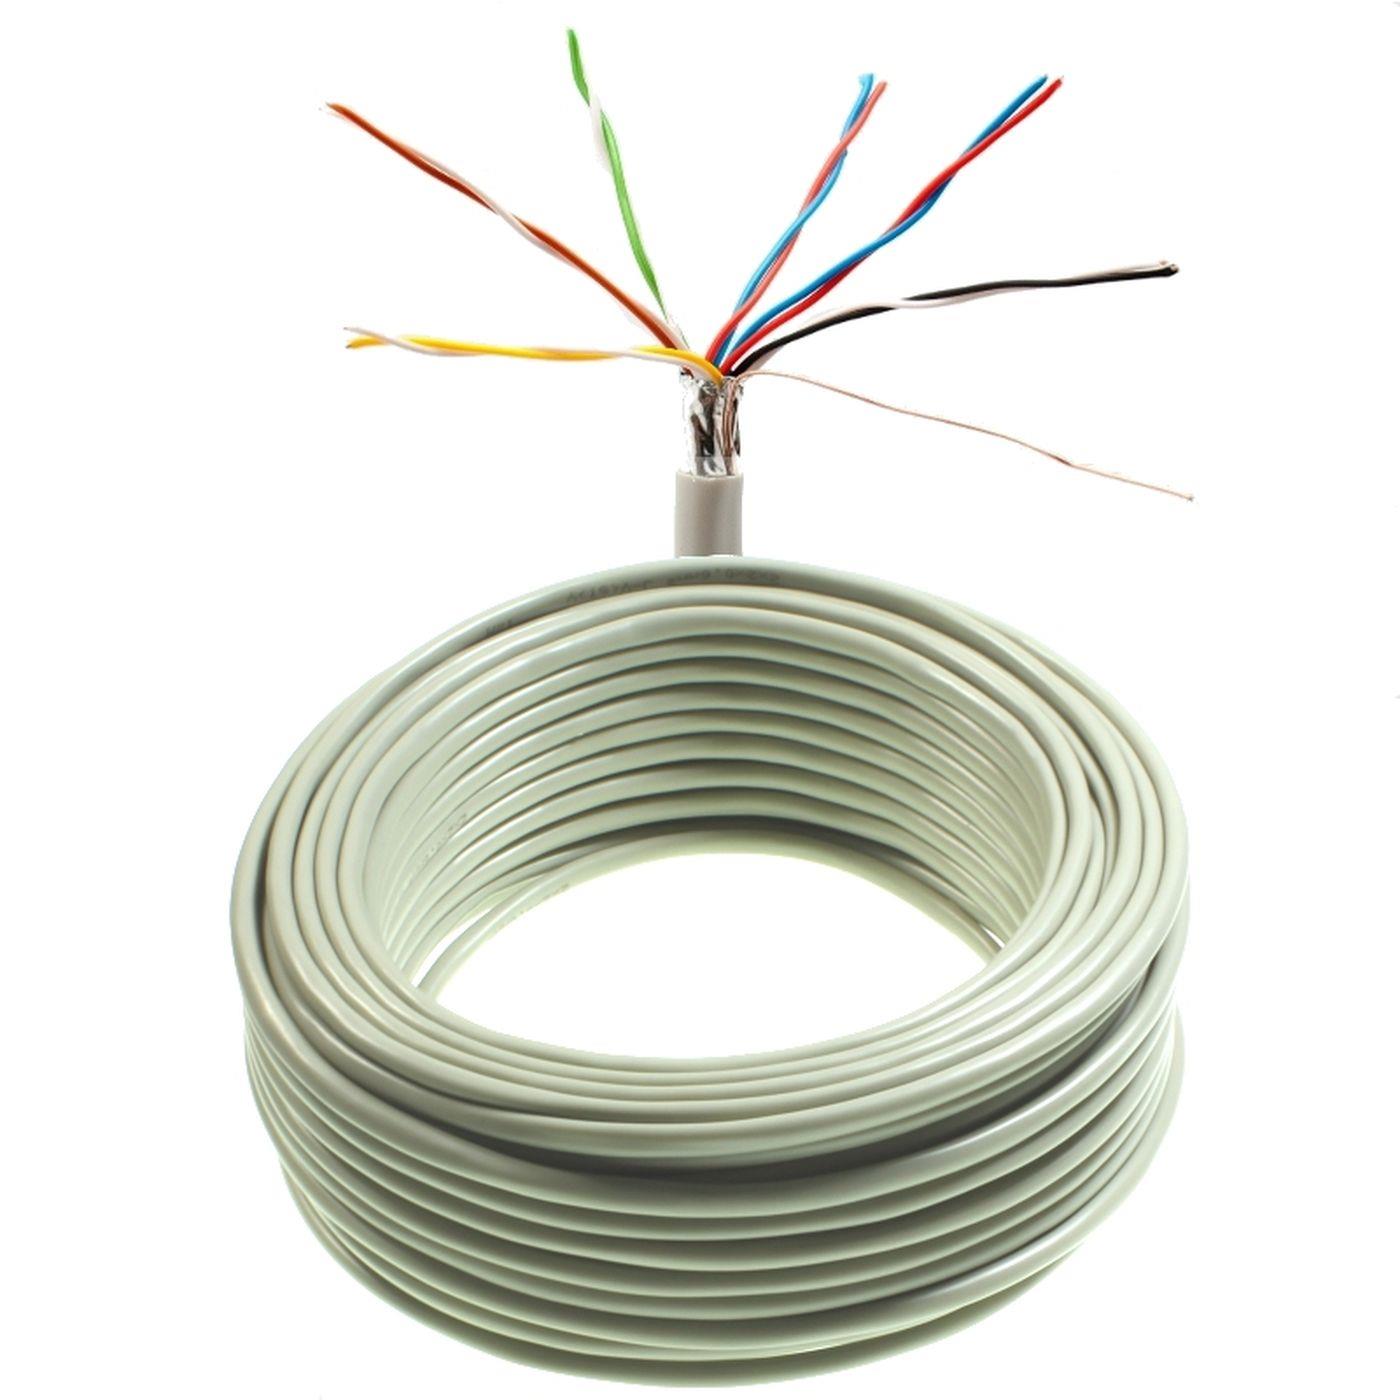 25m Telephone cable 6x2x0,6mm JYSTY 12 Wires ISDN Telecommunication cable Installation Cable J-Y(ST)Y